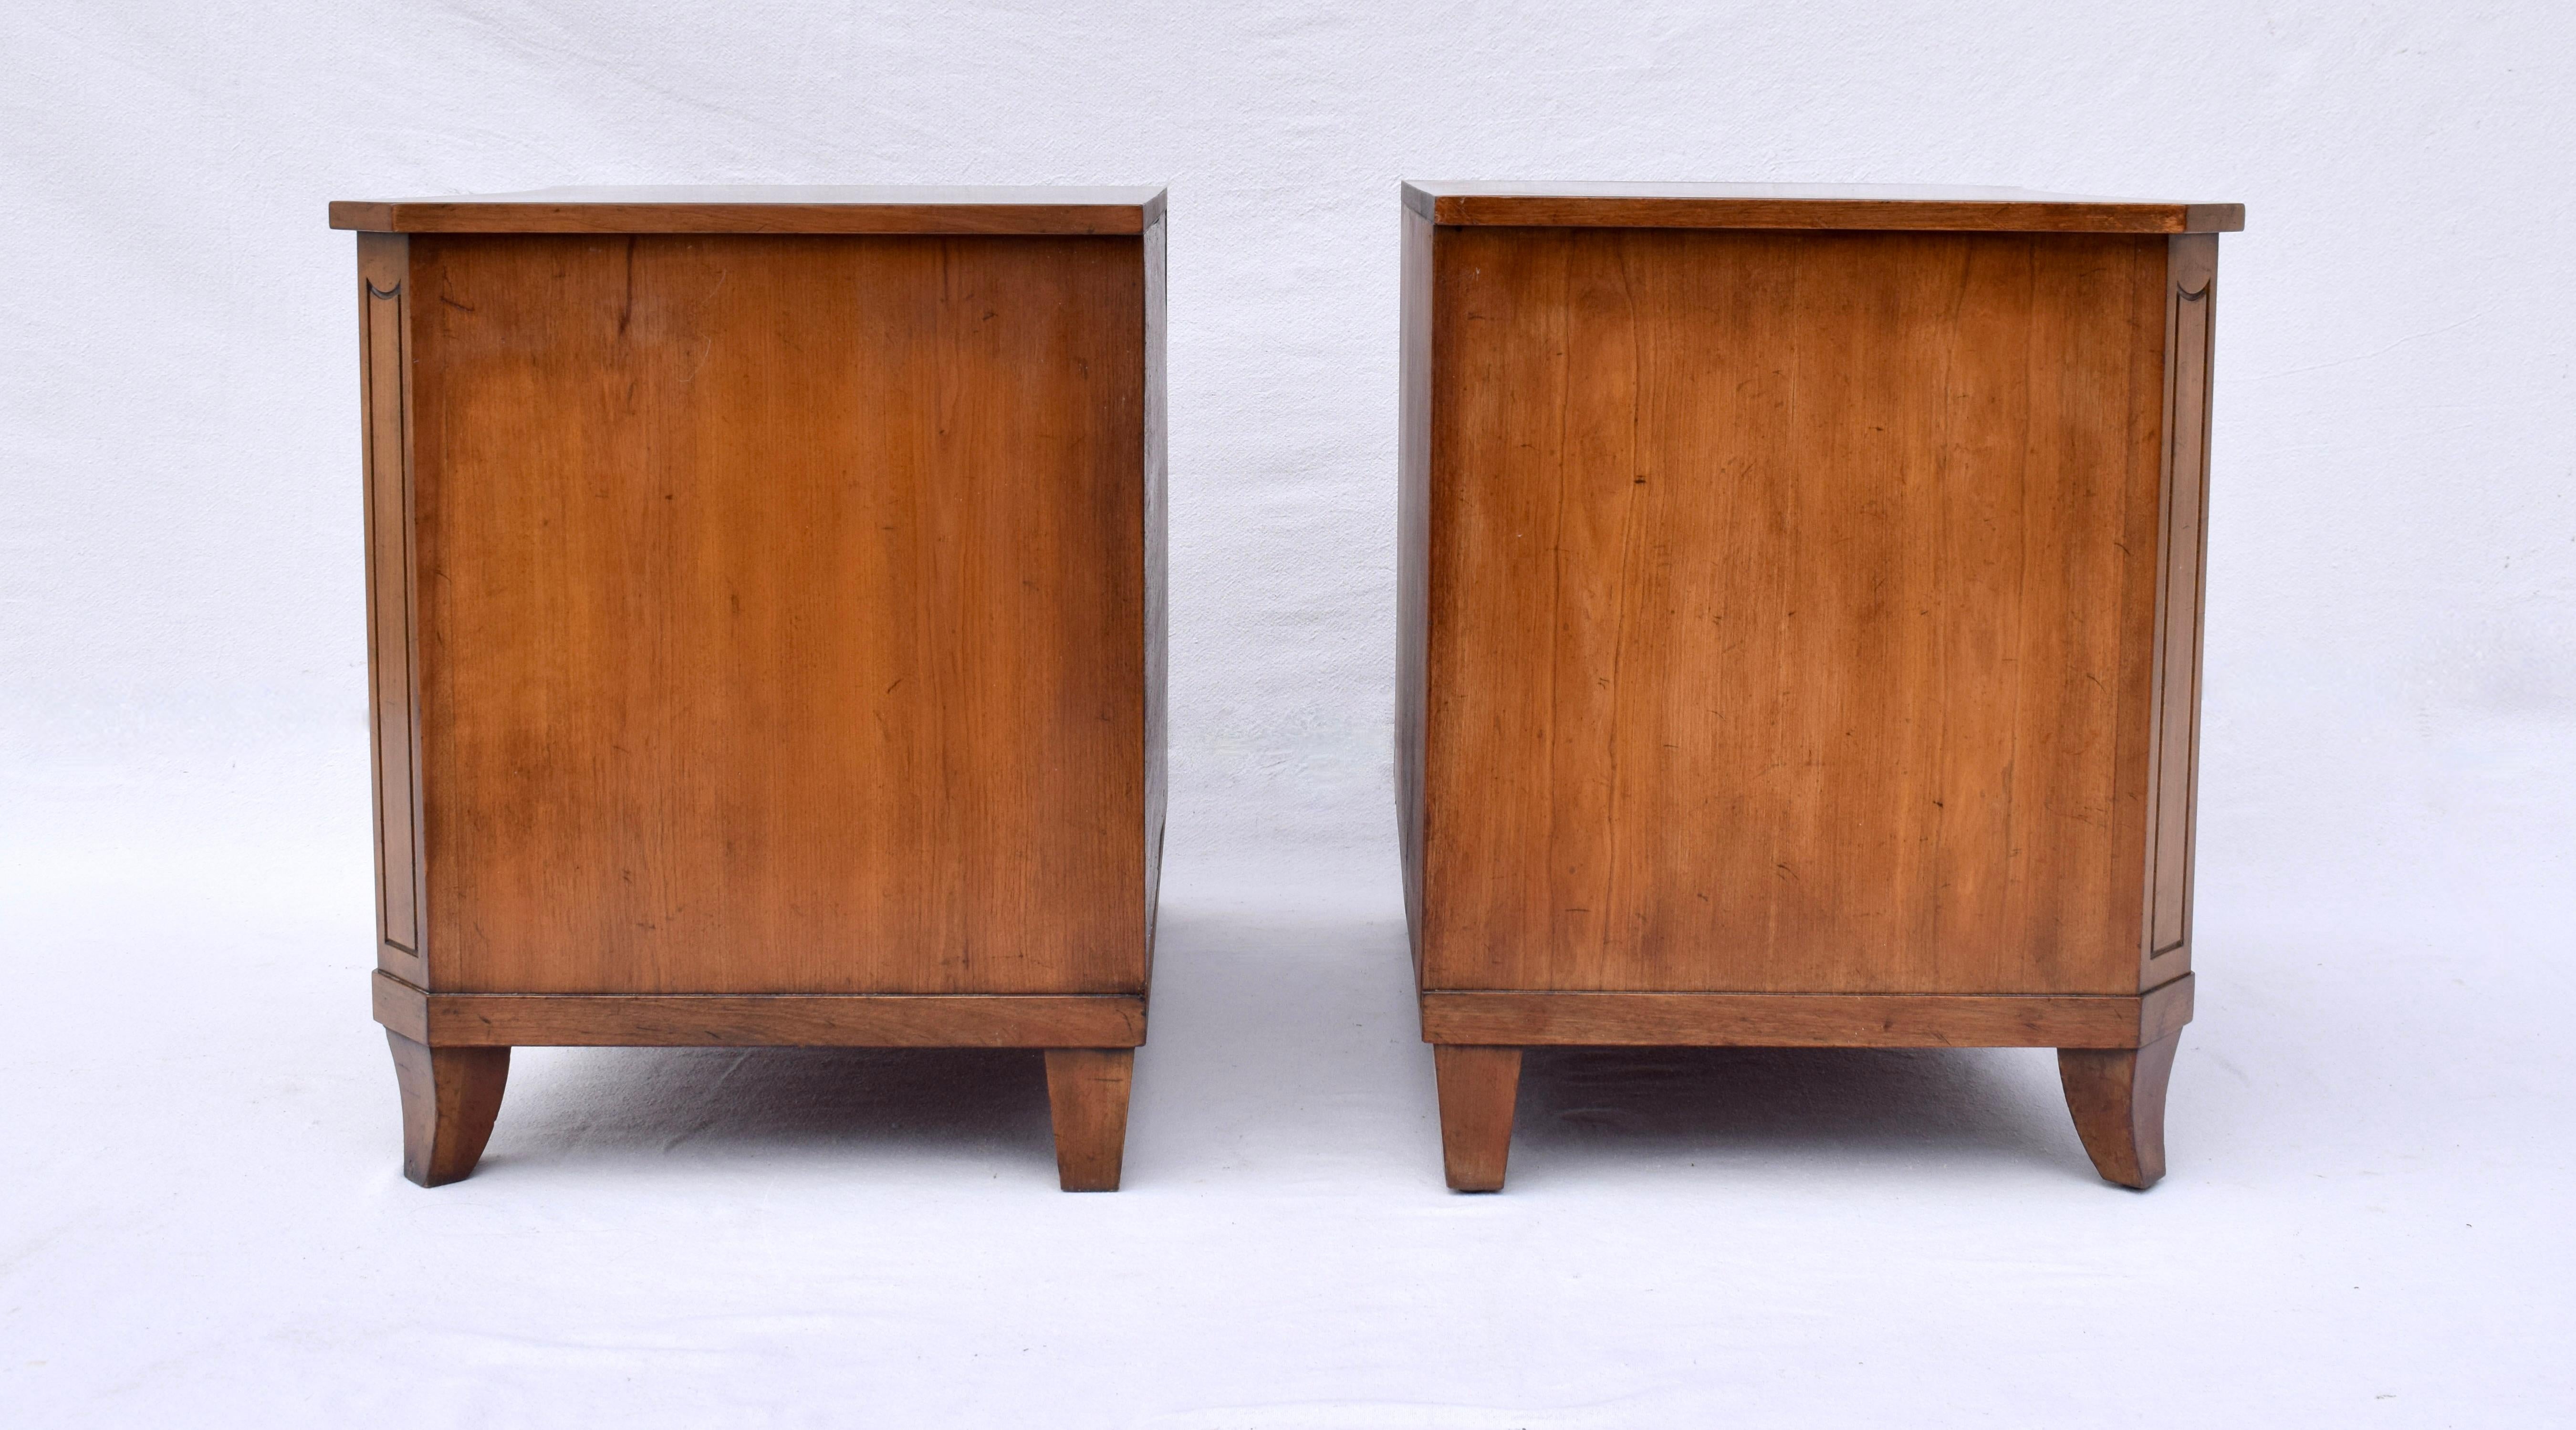 Midcentury Tambour Door Nightstand Cabinets by Baker In Good Condition For Sale In Southampton, NJ